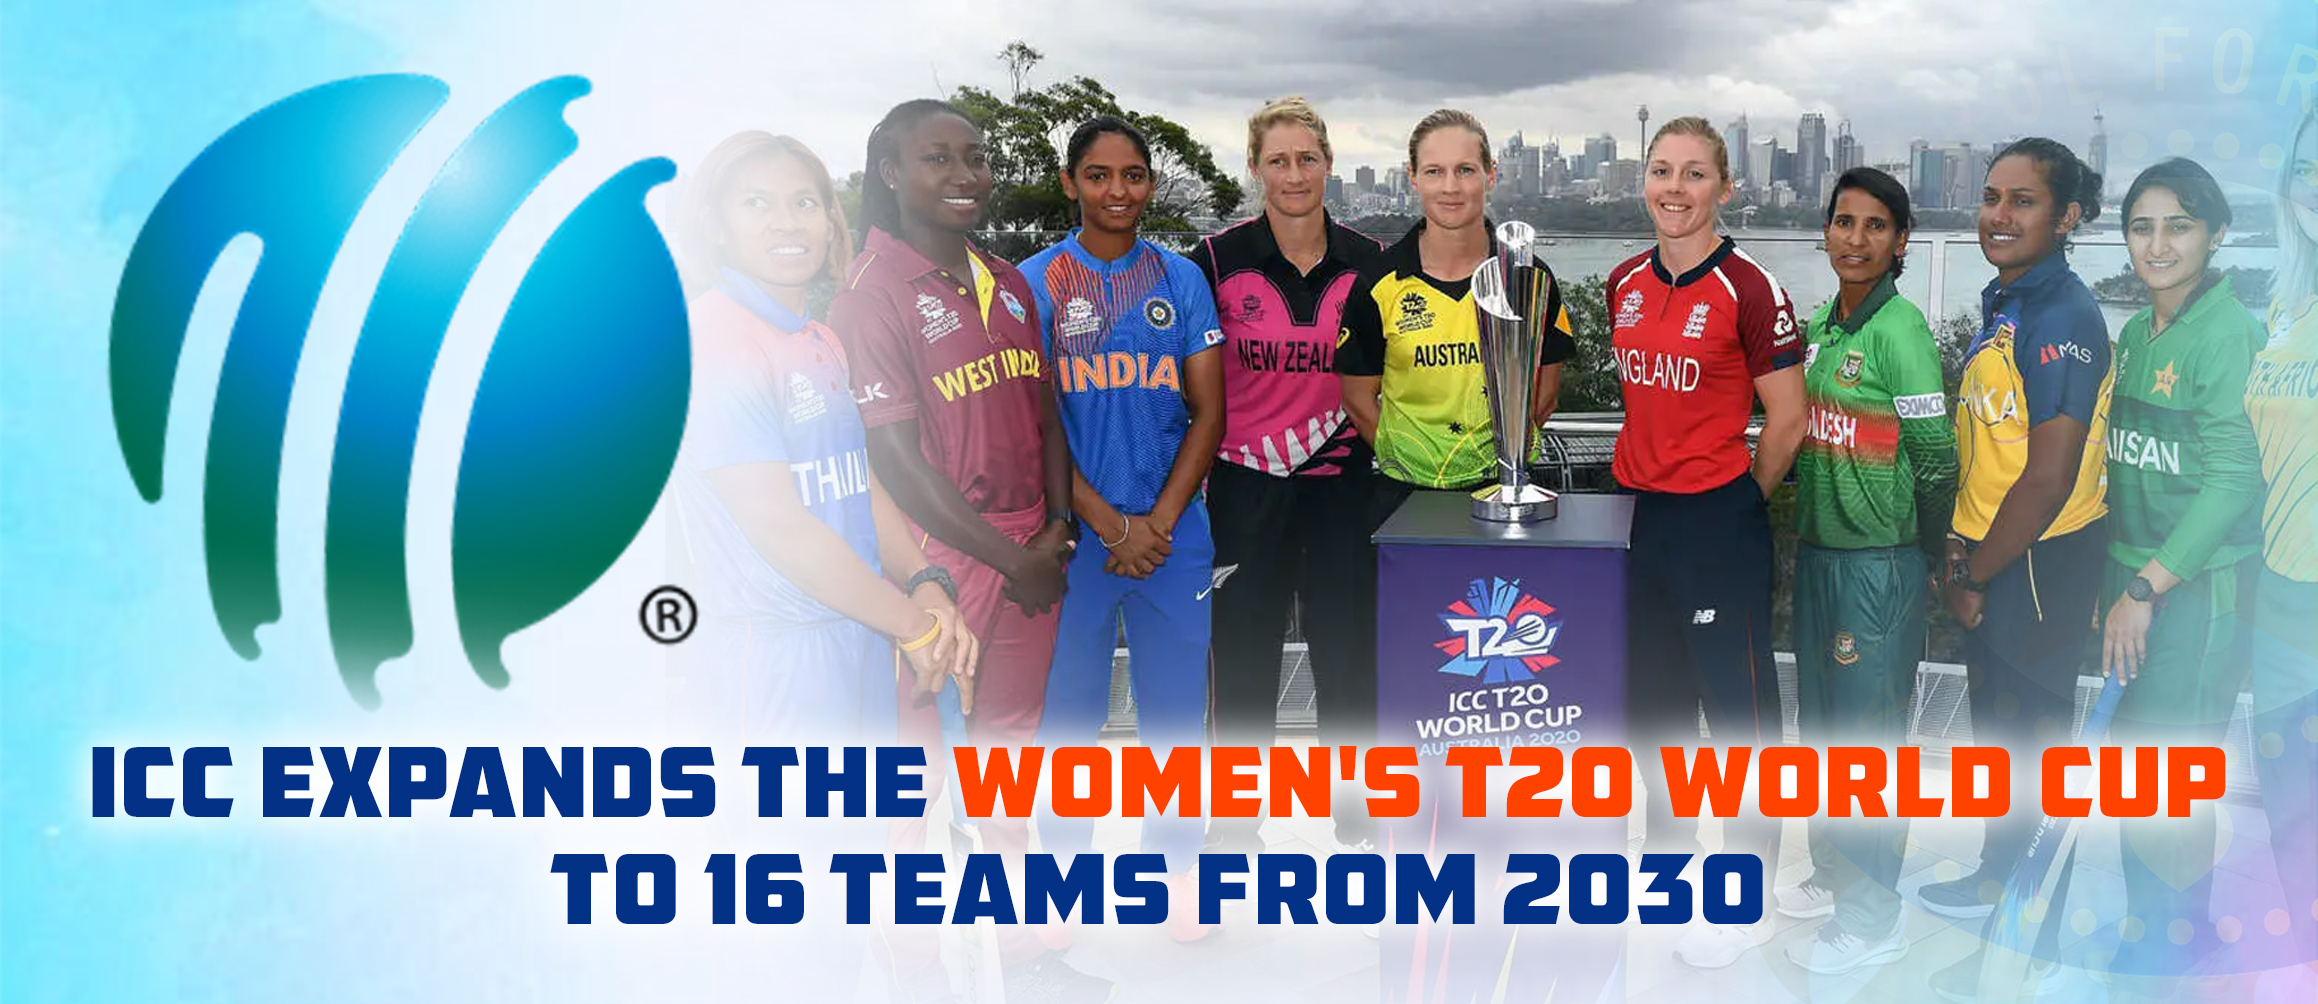 ICC expands the Women’s T20 World Cup to 16 teams from 2030